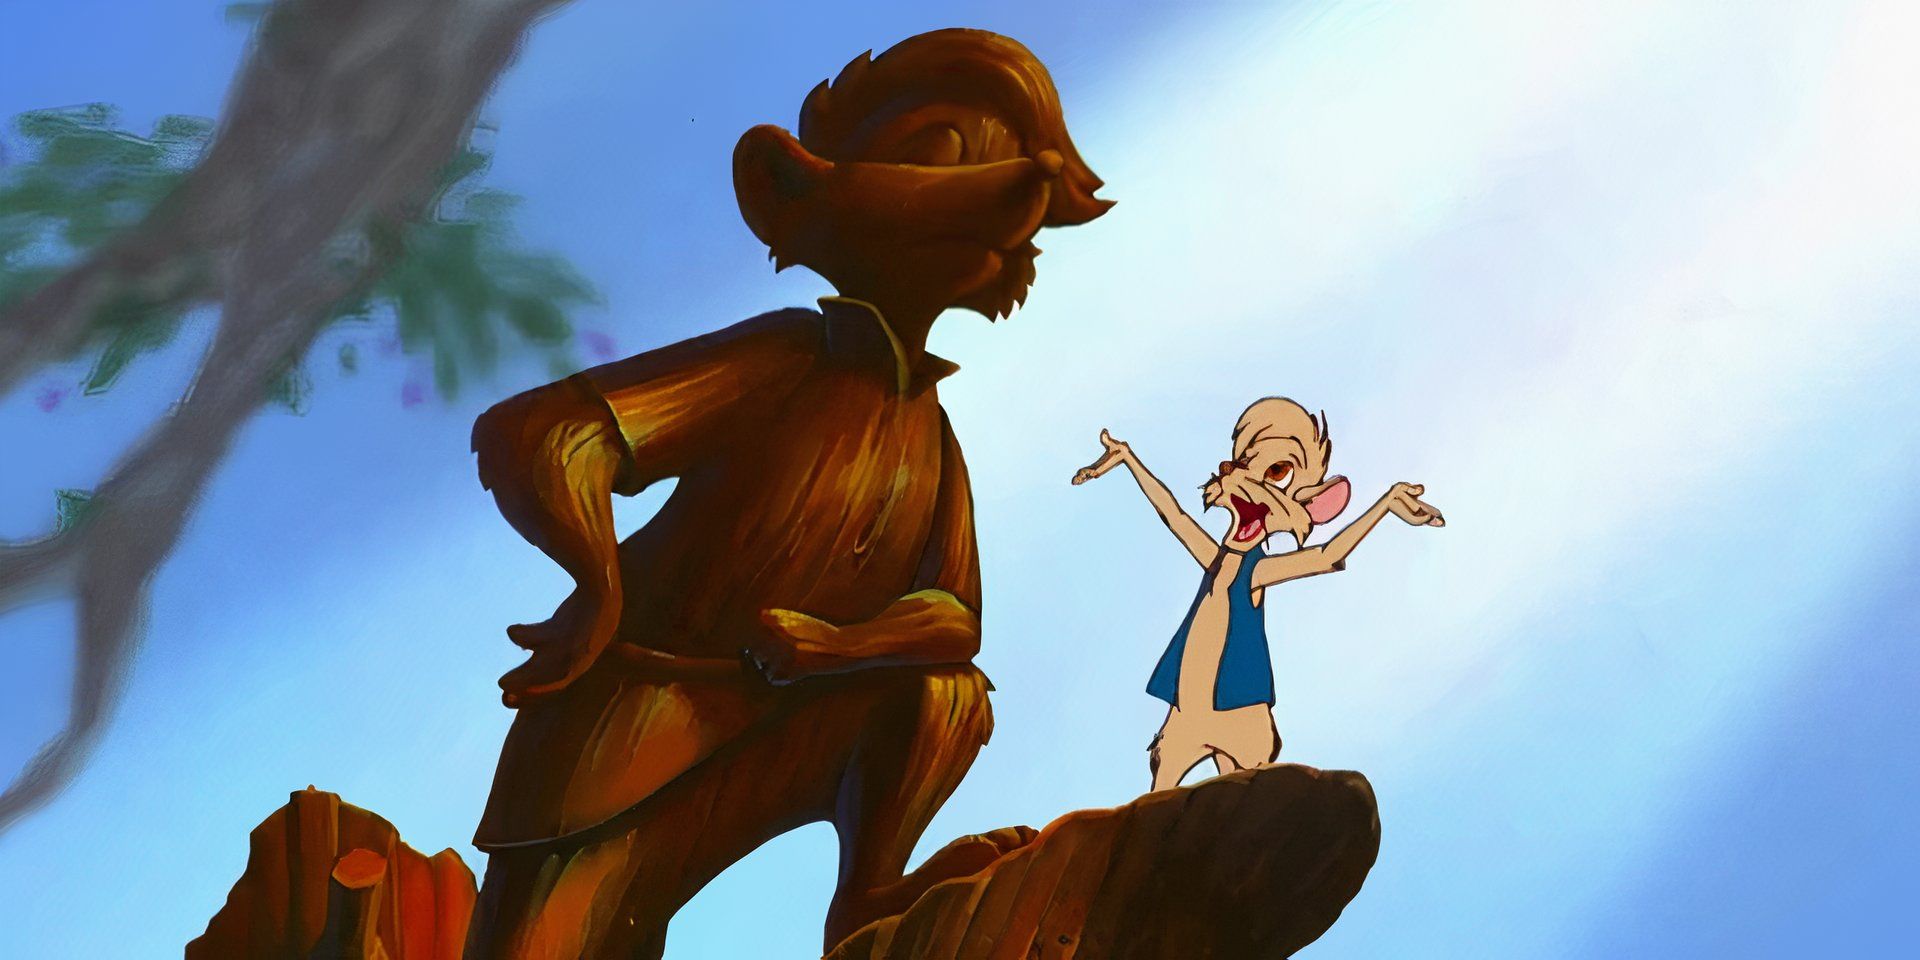 Timmy standing next to a proud wooden statue of his father, Jonathan, in 'The Secret of Nimh 2: Timmy to the Rescue' (1998)